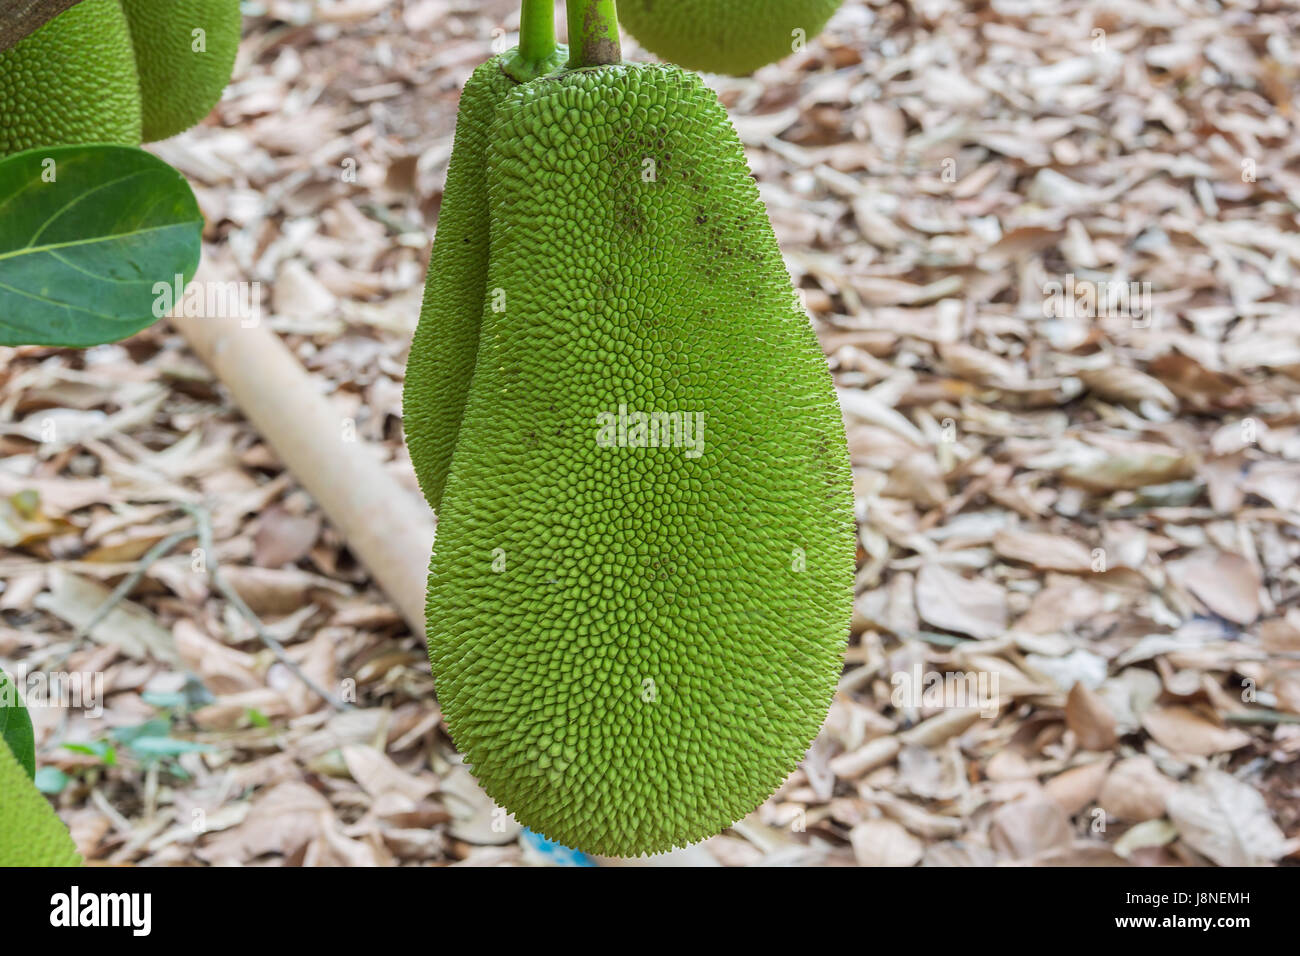 Close-up of a jackfruit hanging on a tree. Selective focus on the fruit. Stock Photo